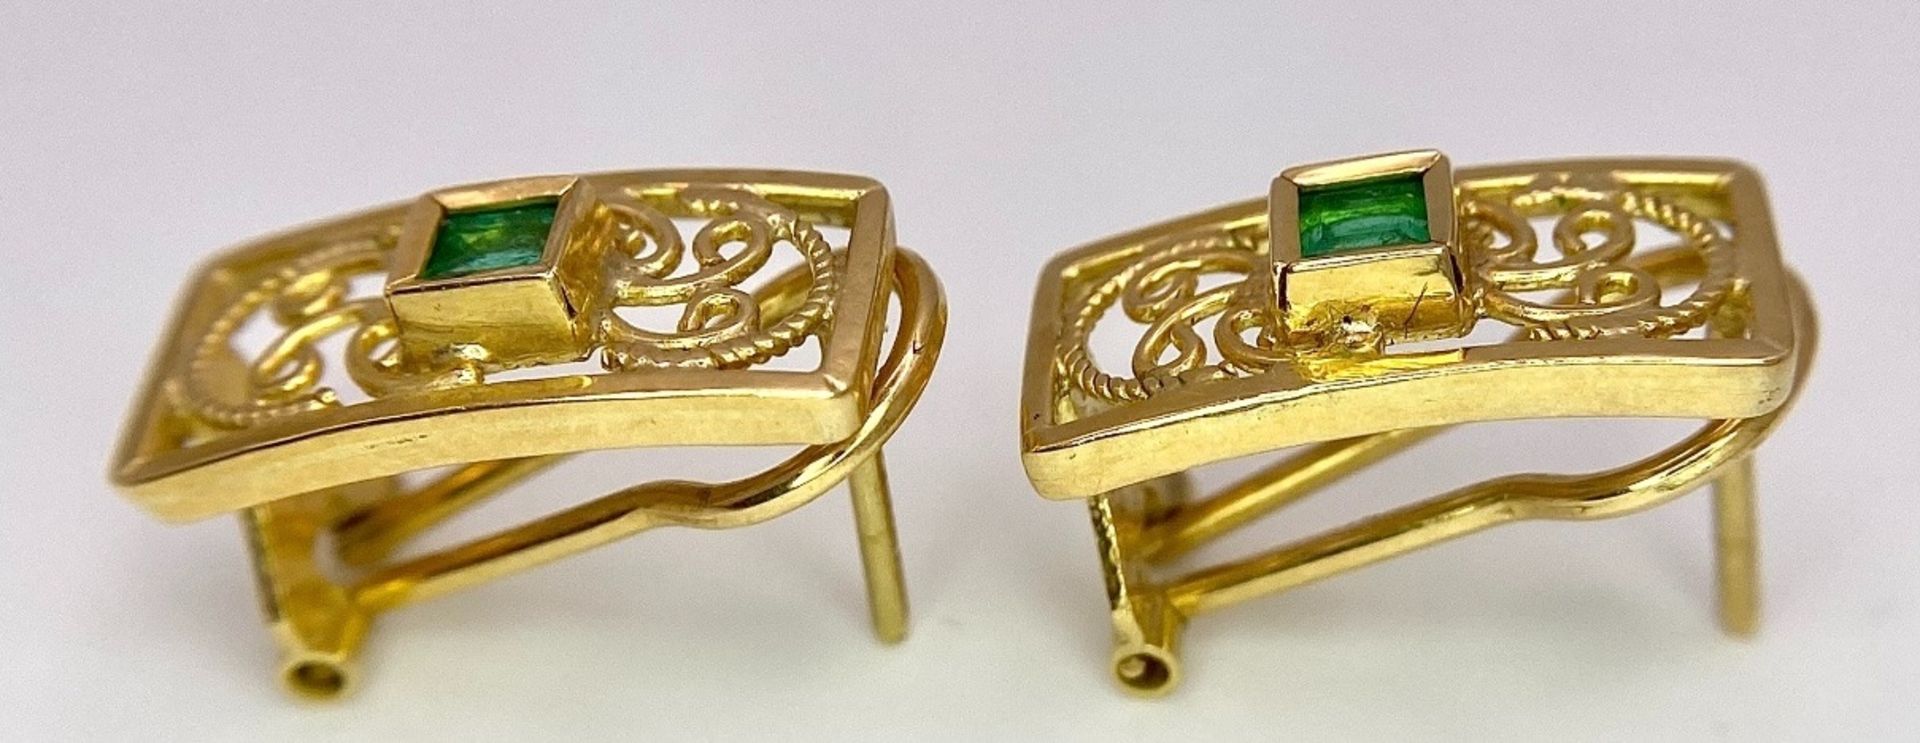 A Pair of 18K Yellow Gold and Emerald Earrings. Clip clasp with pierced decoration. 17mm. 3.9g total - Bild 4 aus 7